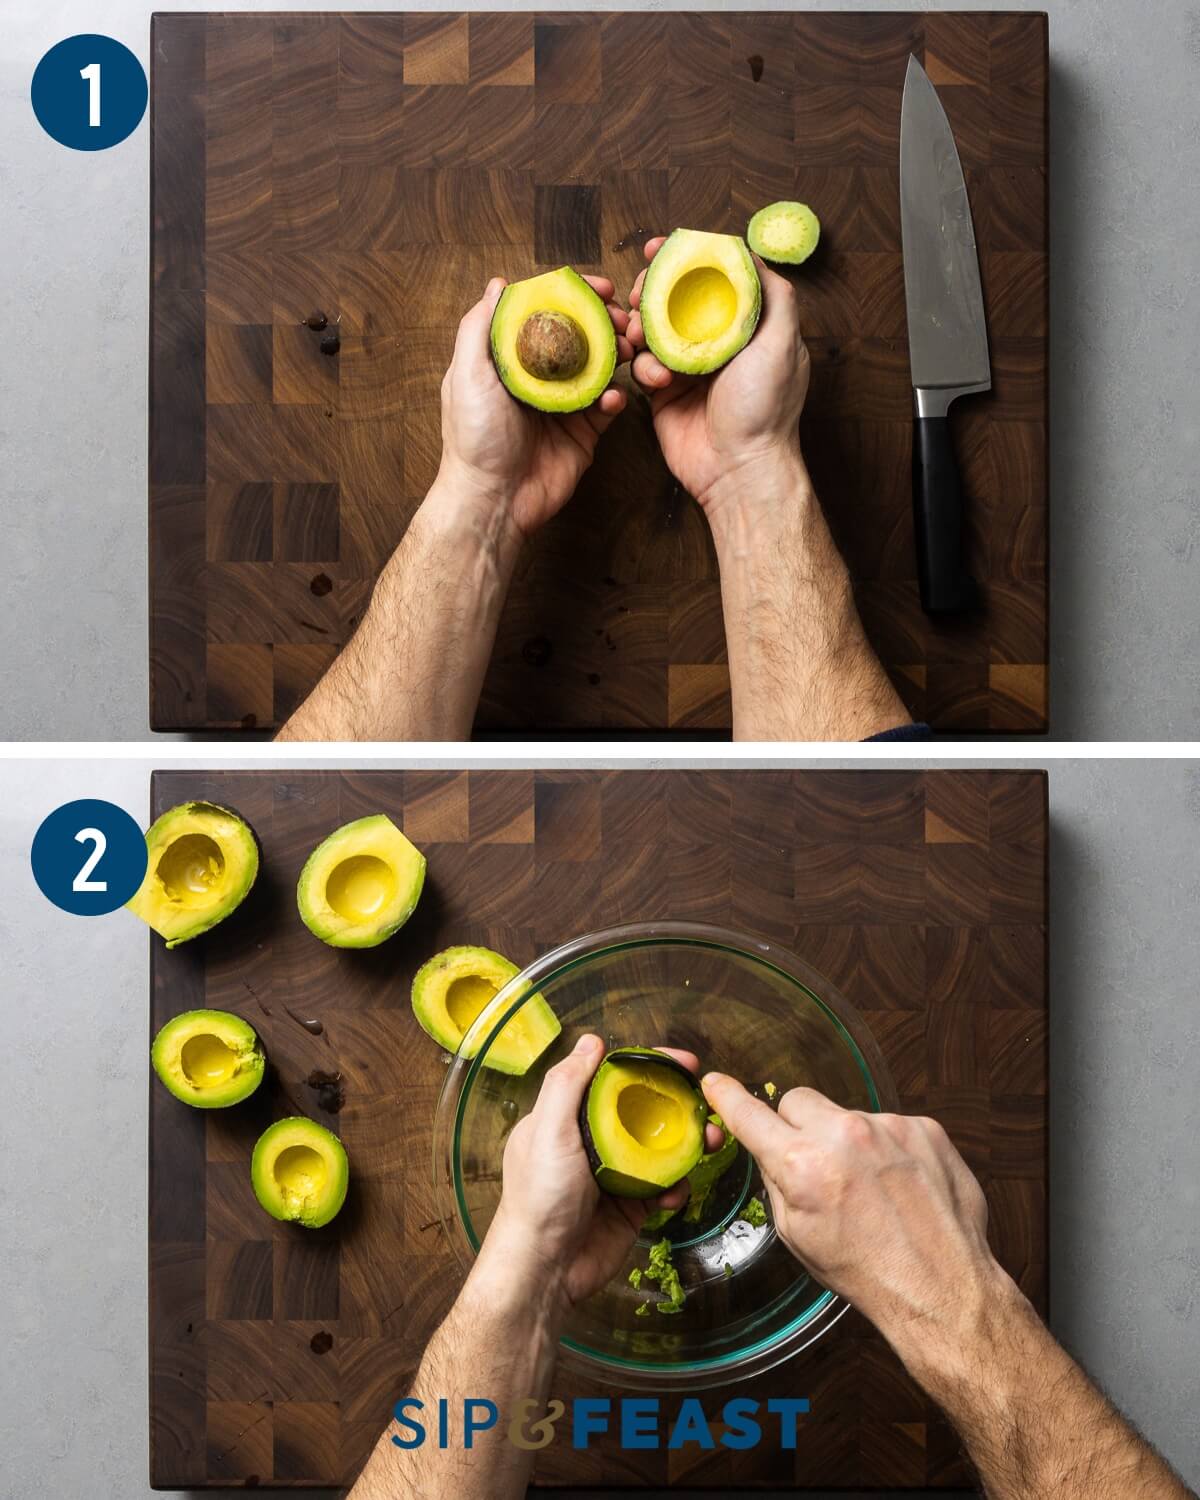 Guacamole recipe process shot collage group one showing cutting and scooping of avocado into bowl.
